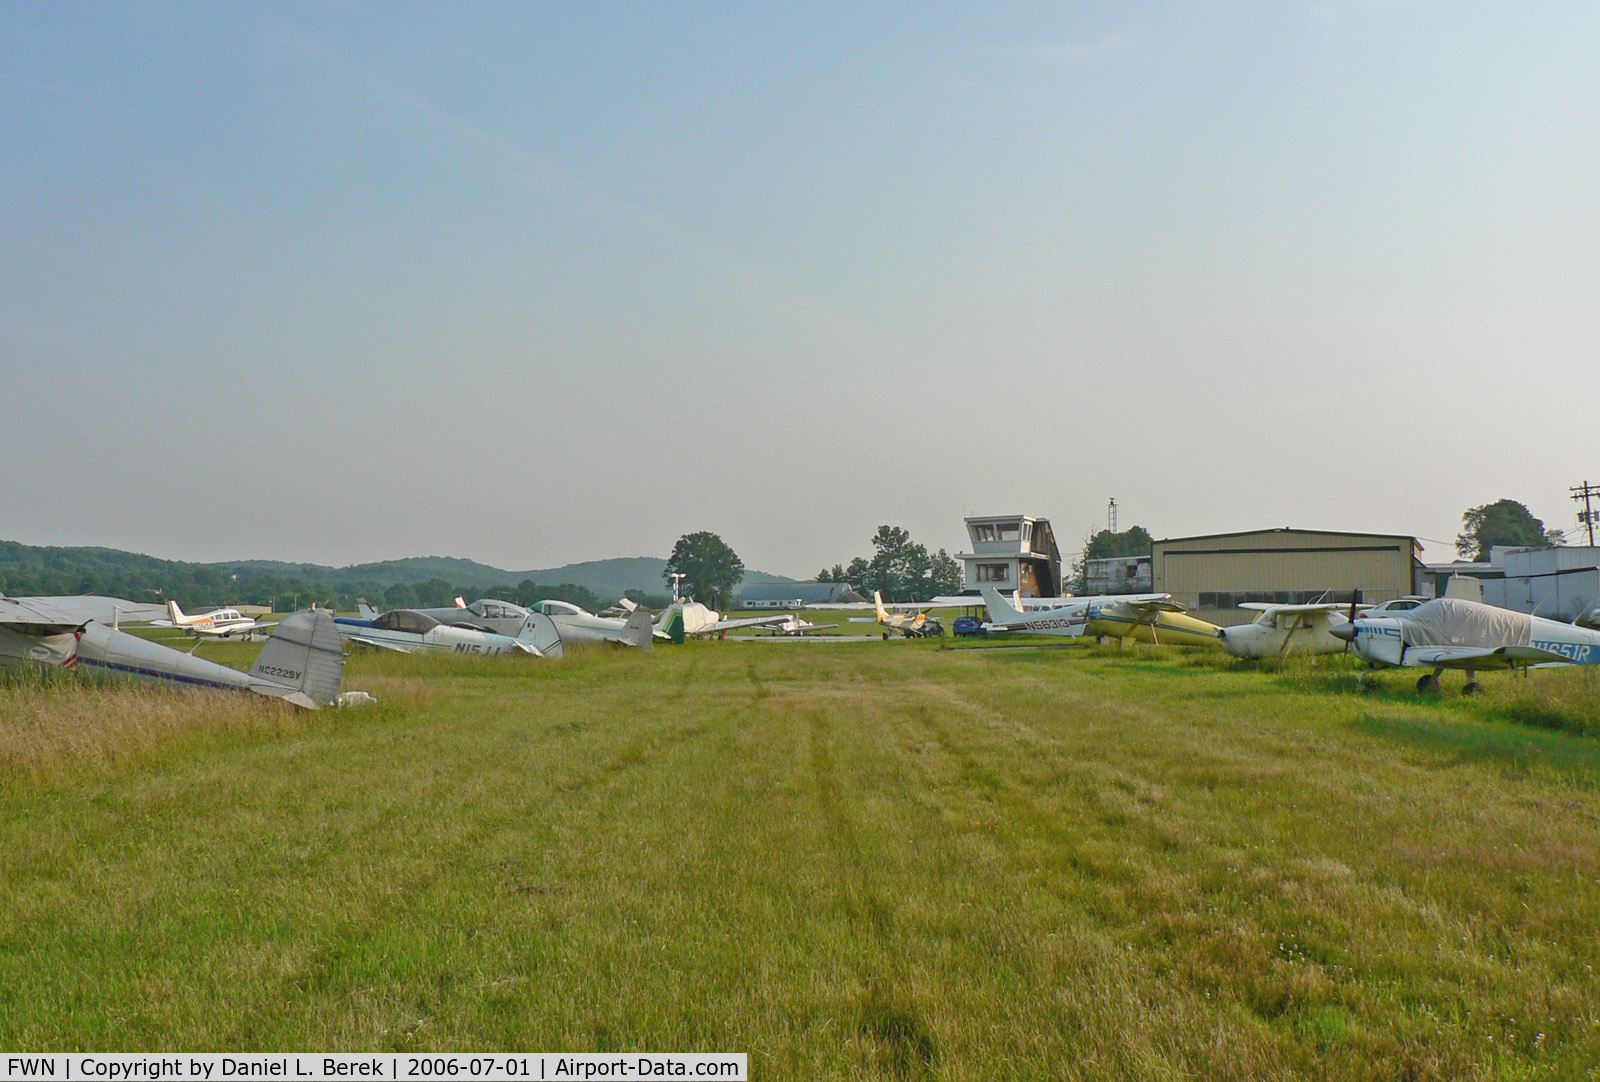 Sussex Airport (FWN) - Sussex is a small, friendly airport with many interesting and old planes.